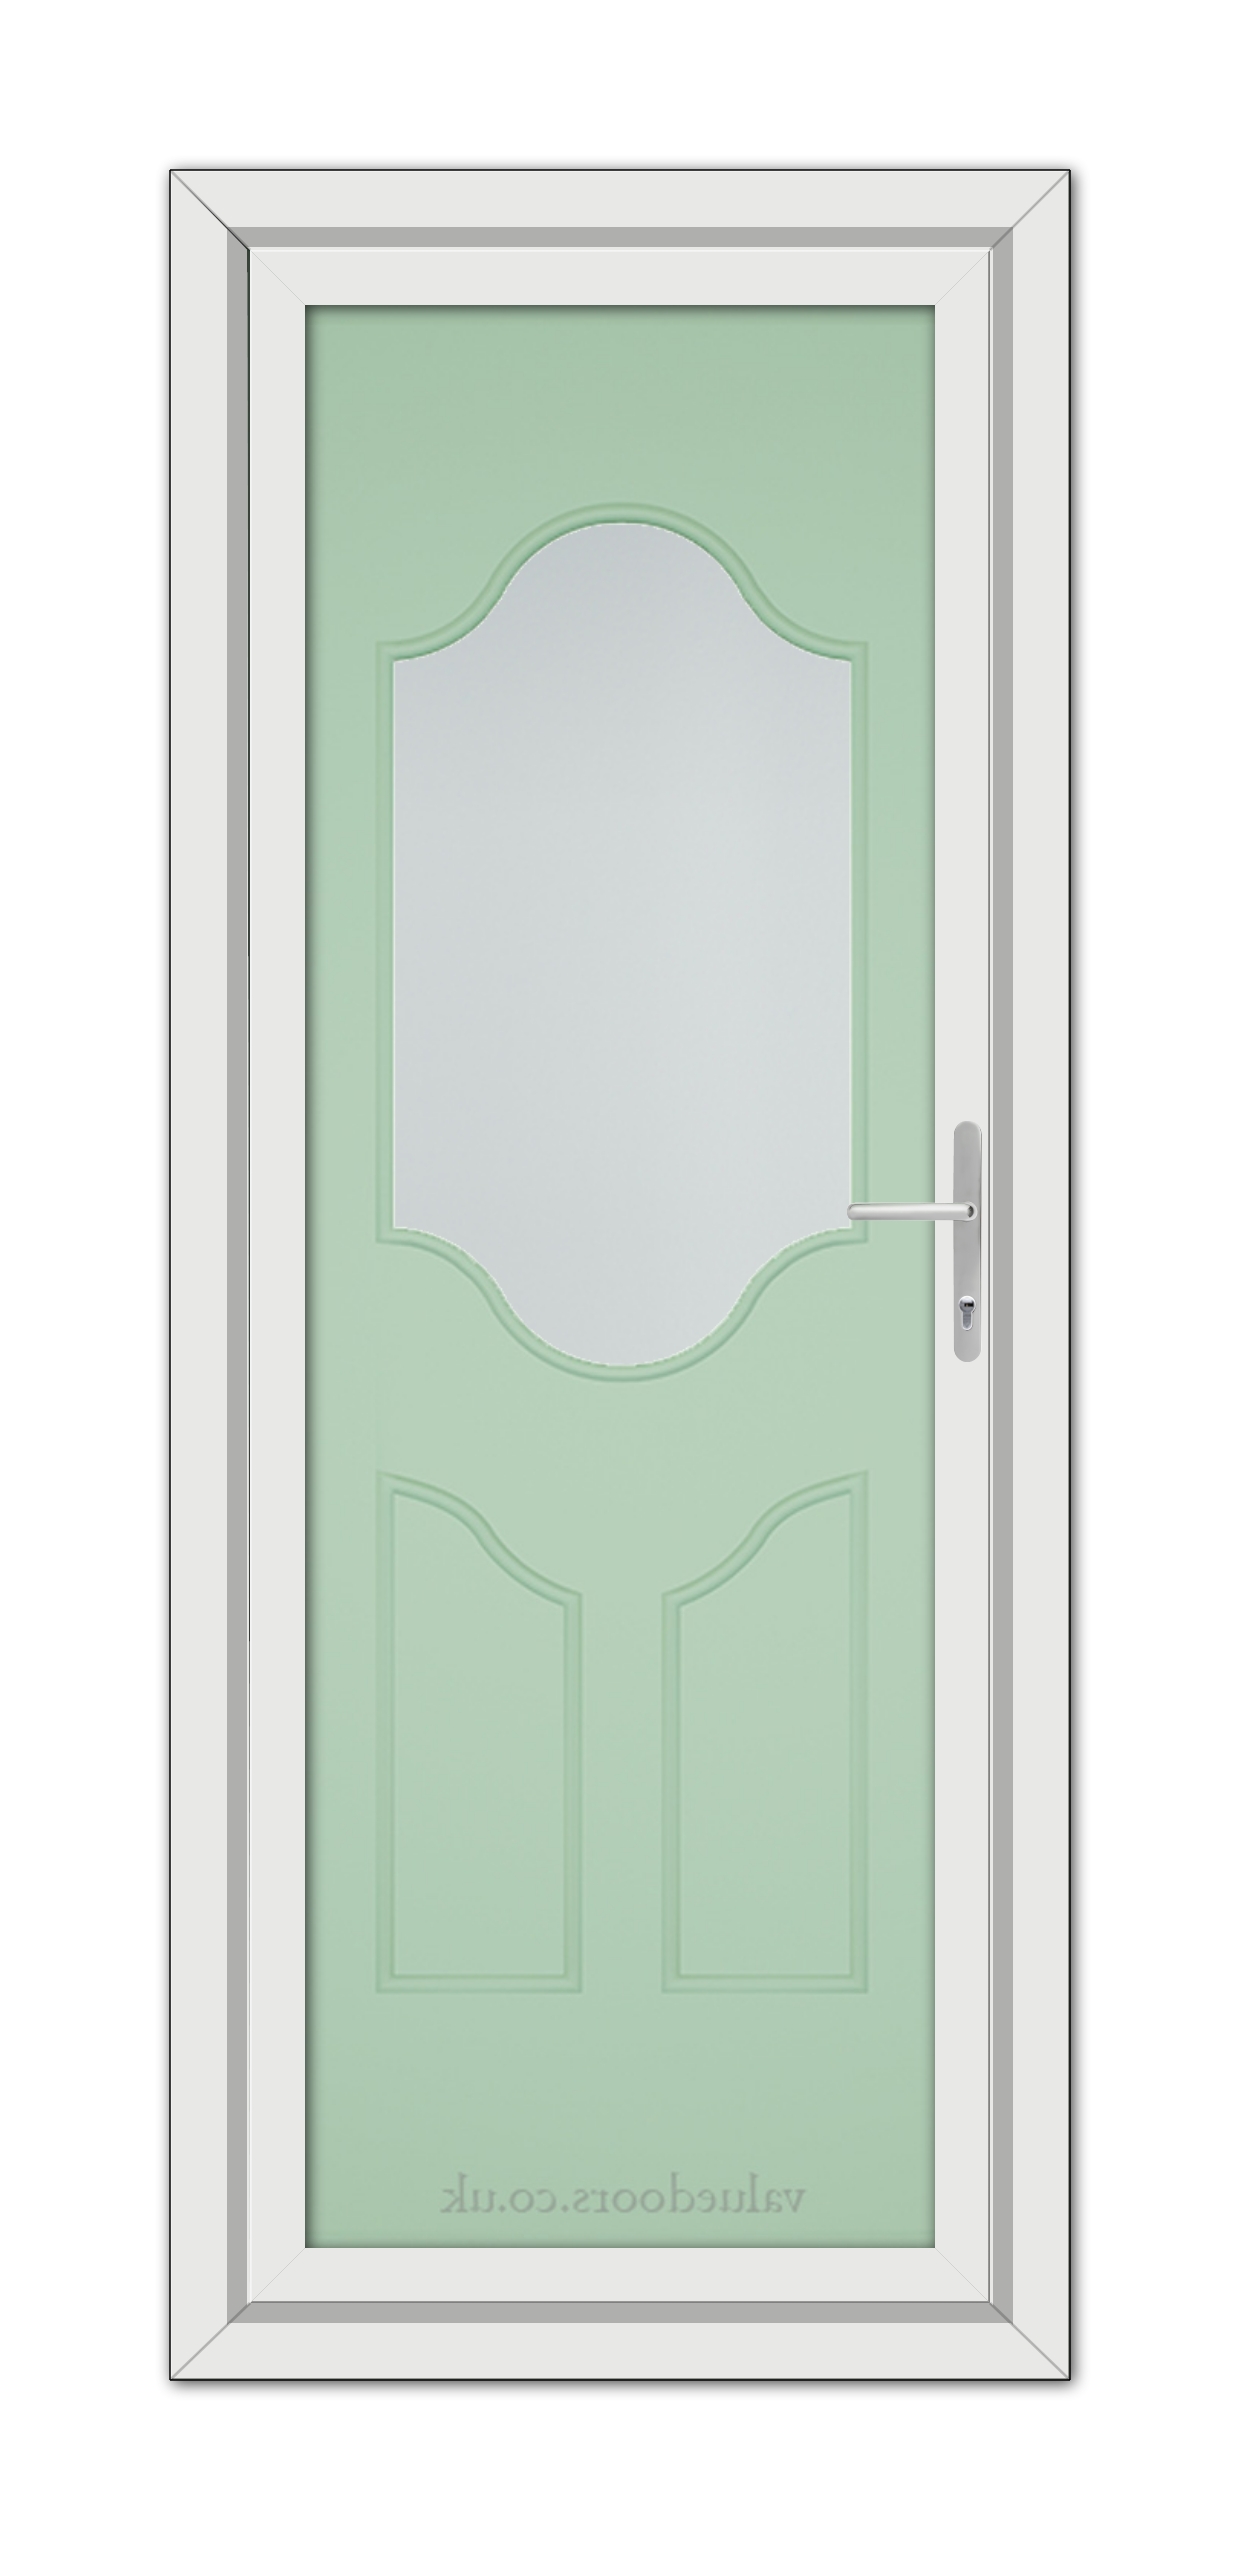 A close-up of a Chartwell Green Althorpe One uPVC Door.